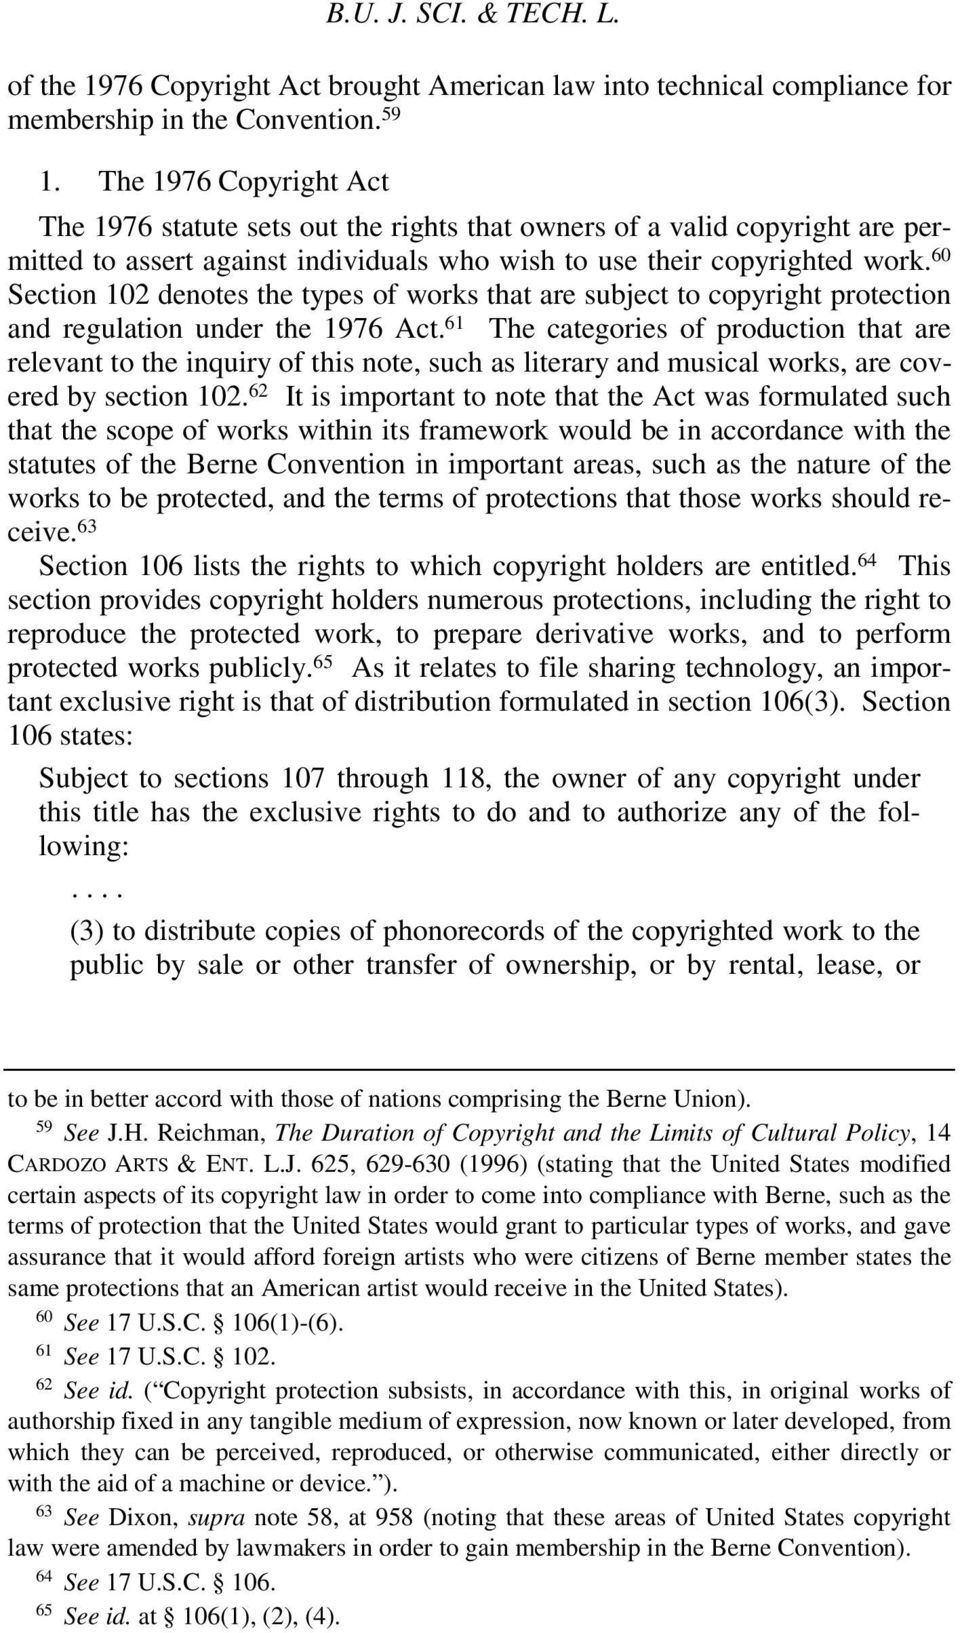 60 Section 102 denotes the types of works that are subject to copyright protection and regulation under the 1976 Act.